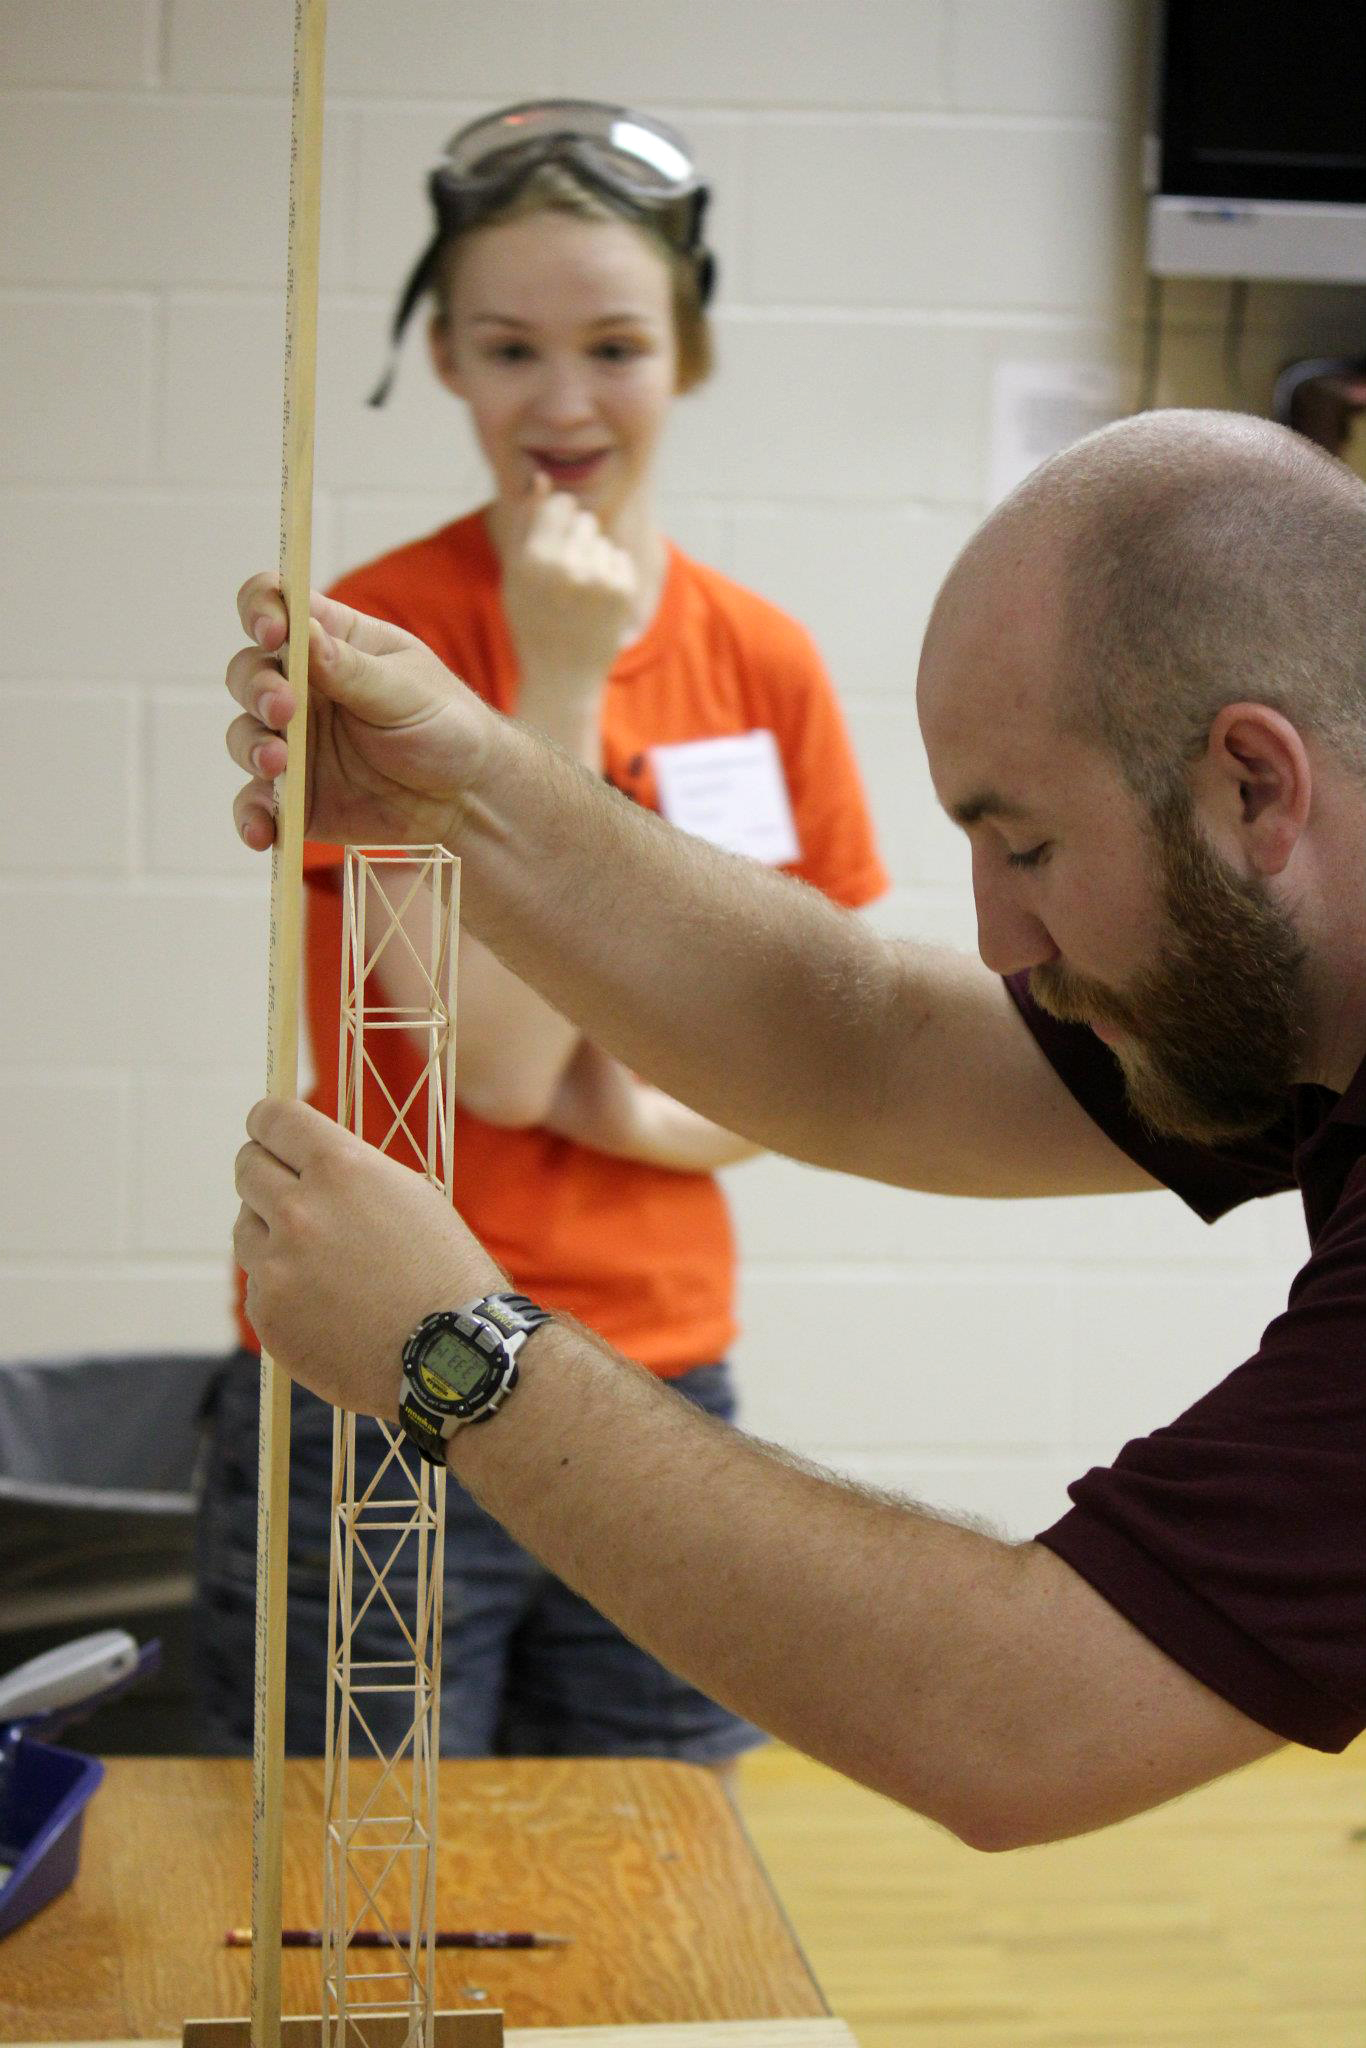 A young competitor eagerly watches as a judge measures her balsa wood tower during the "Towers" event at the Texas Science Olympiad